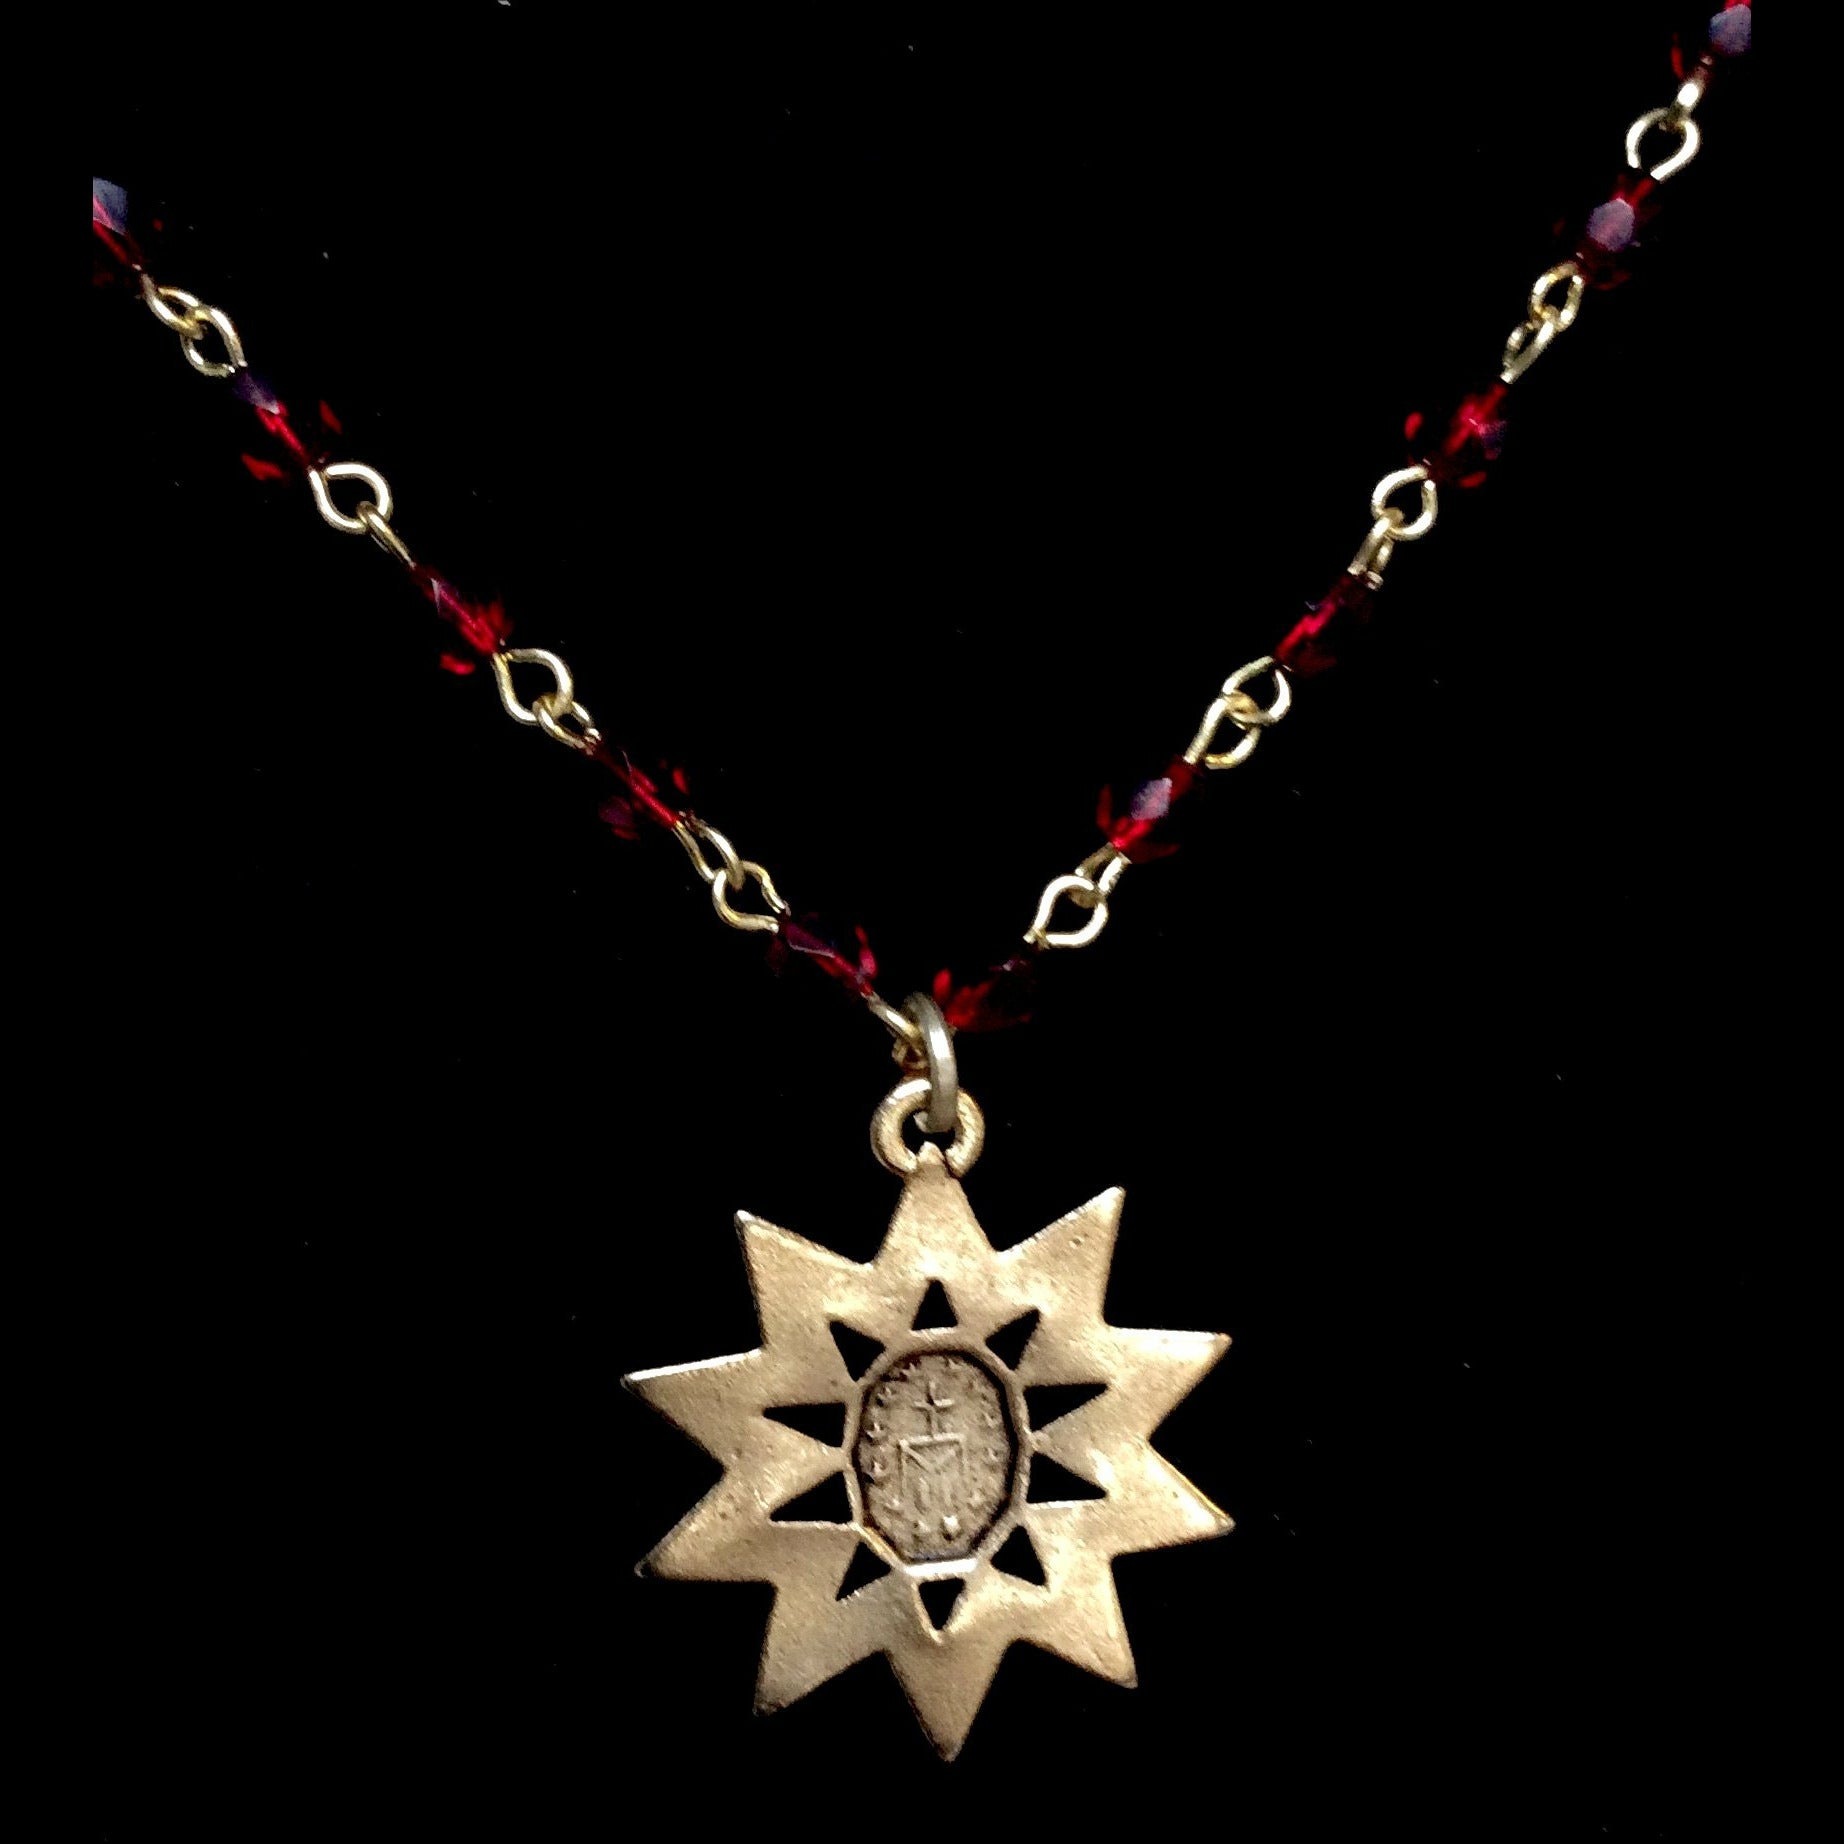 Forgotten Graces "Miraculous Rays" Medal in Garnet and Gold Necklace